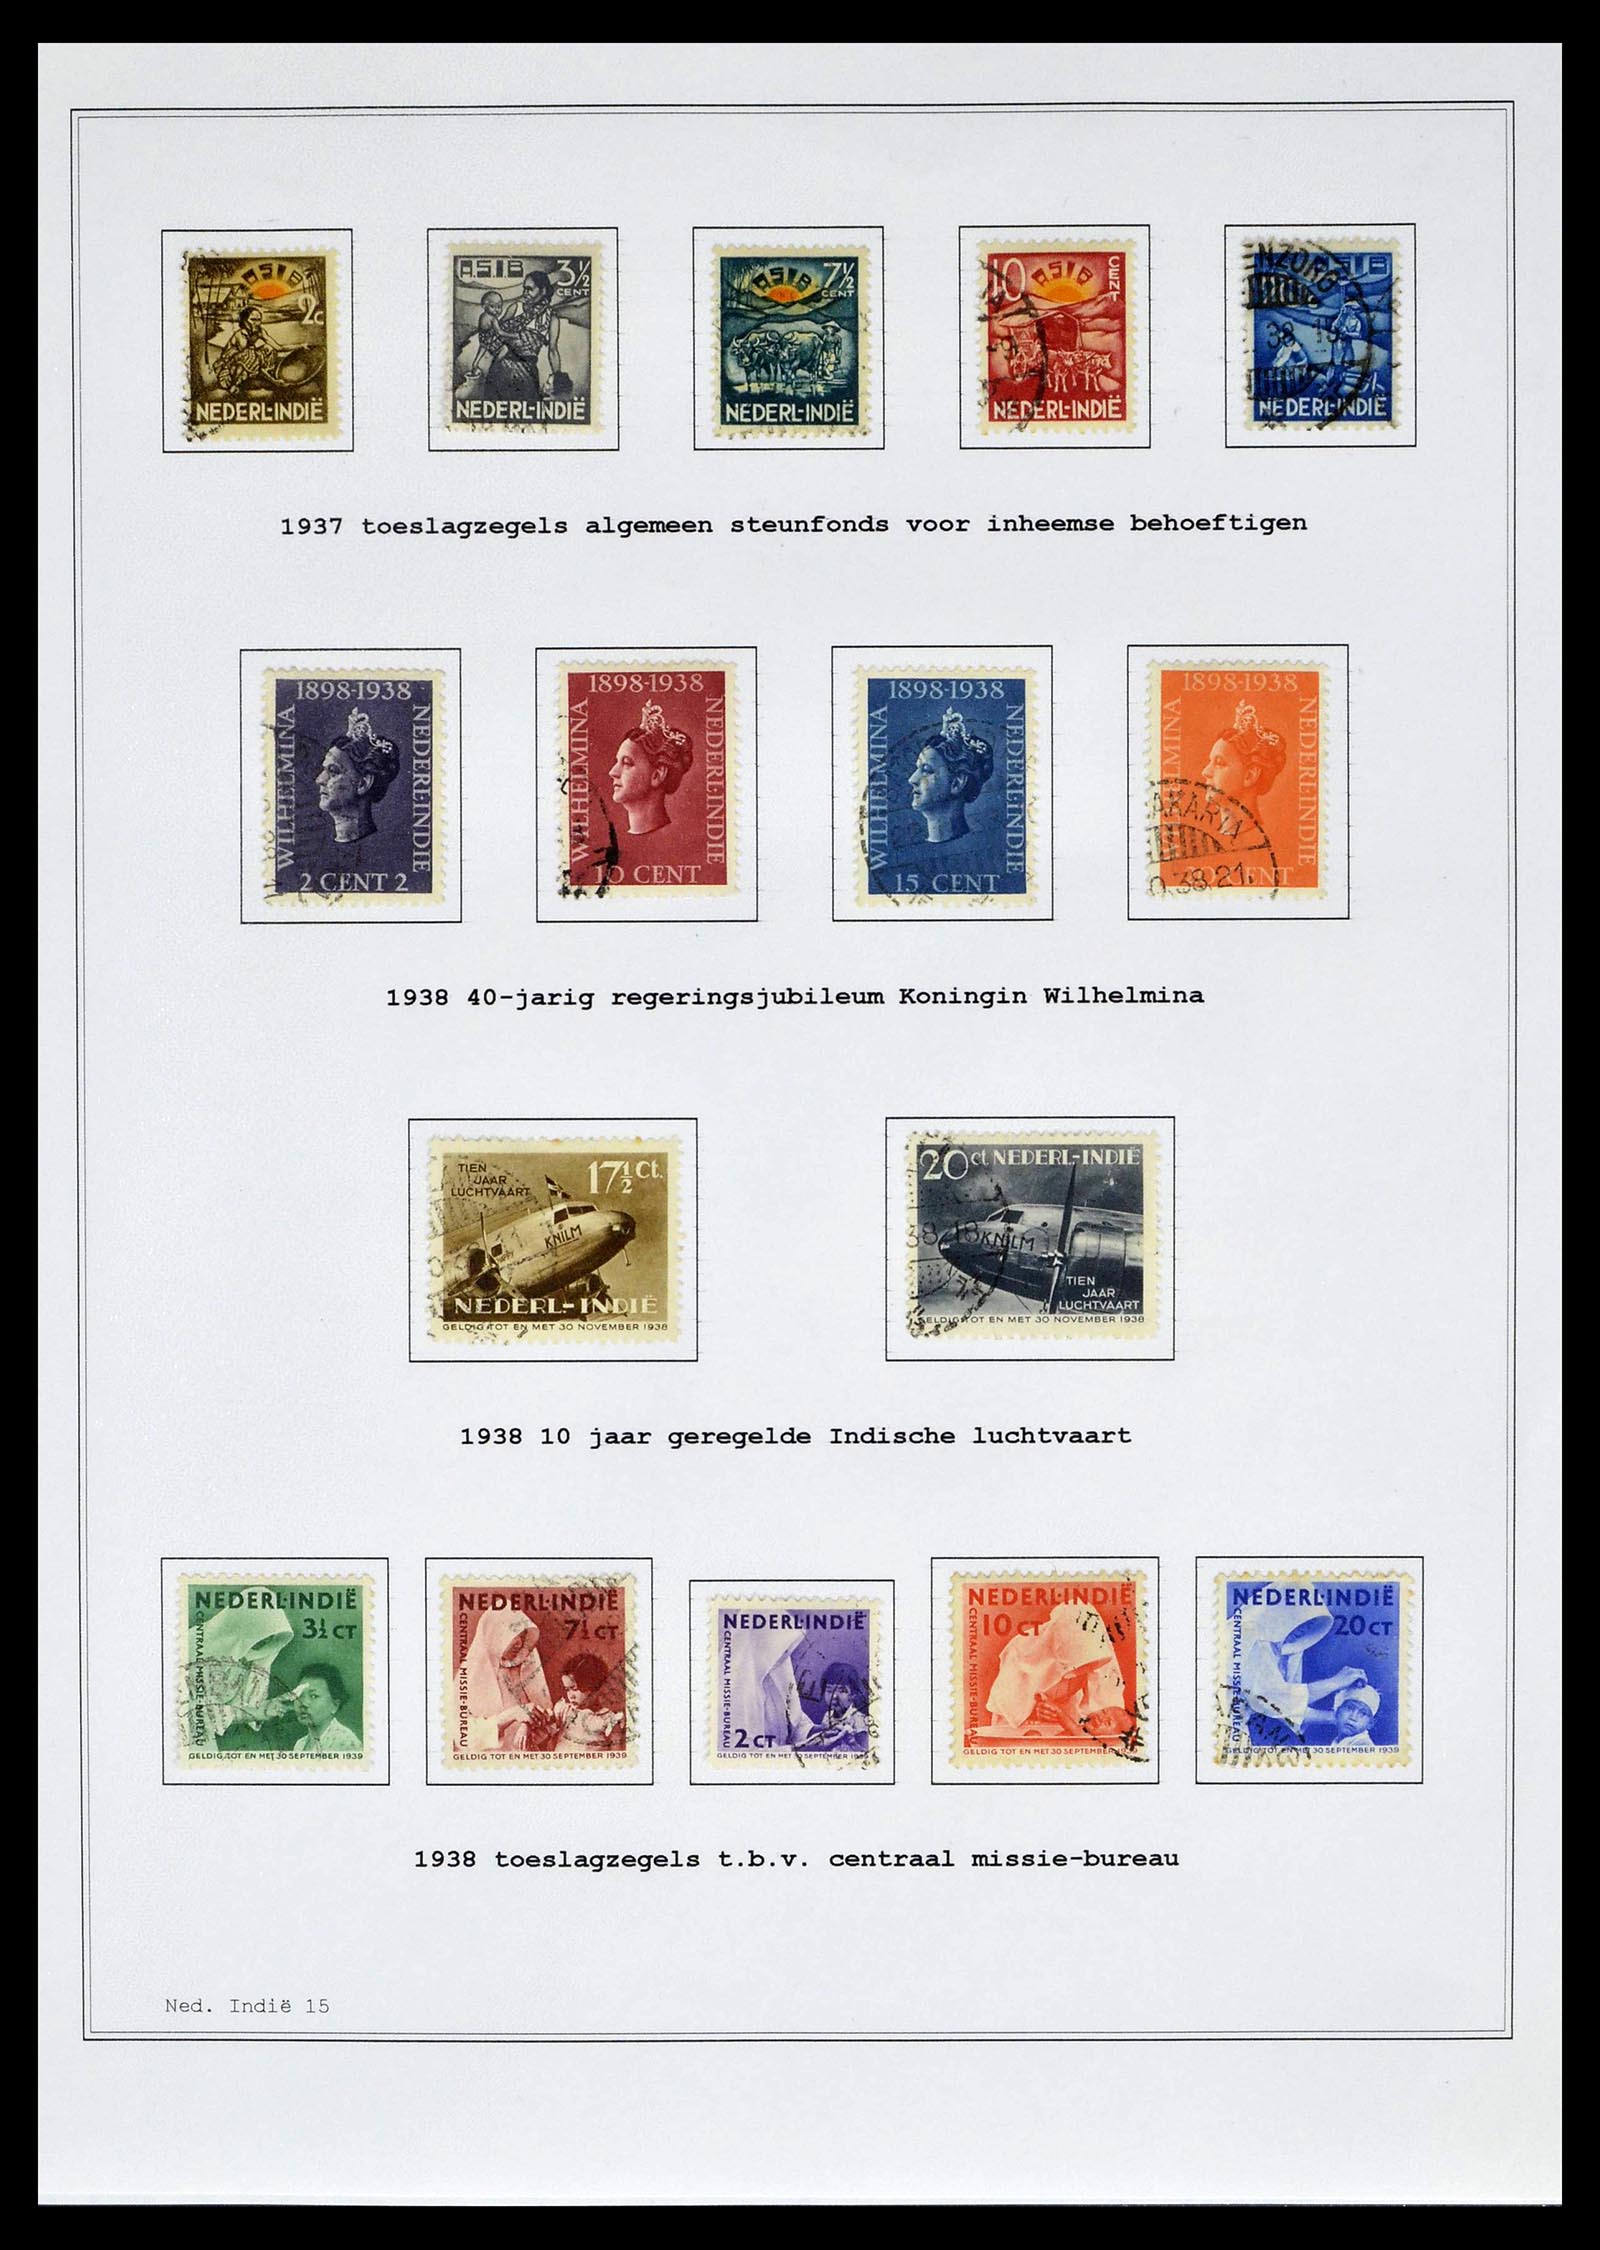 39026 0030 - Stamp collection 39026 Dutch east Indies and Suriname 1864-1975.